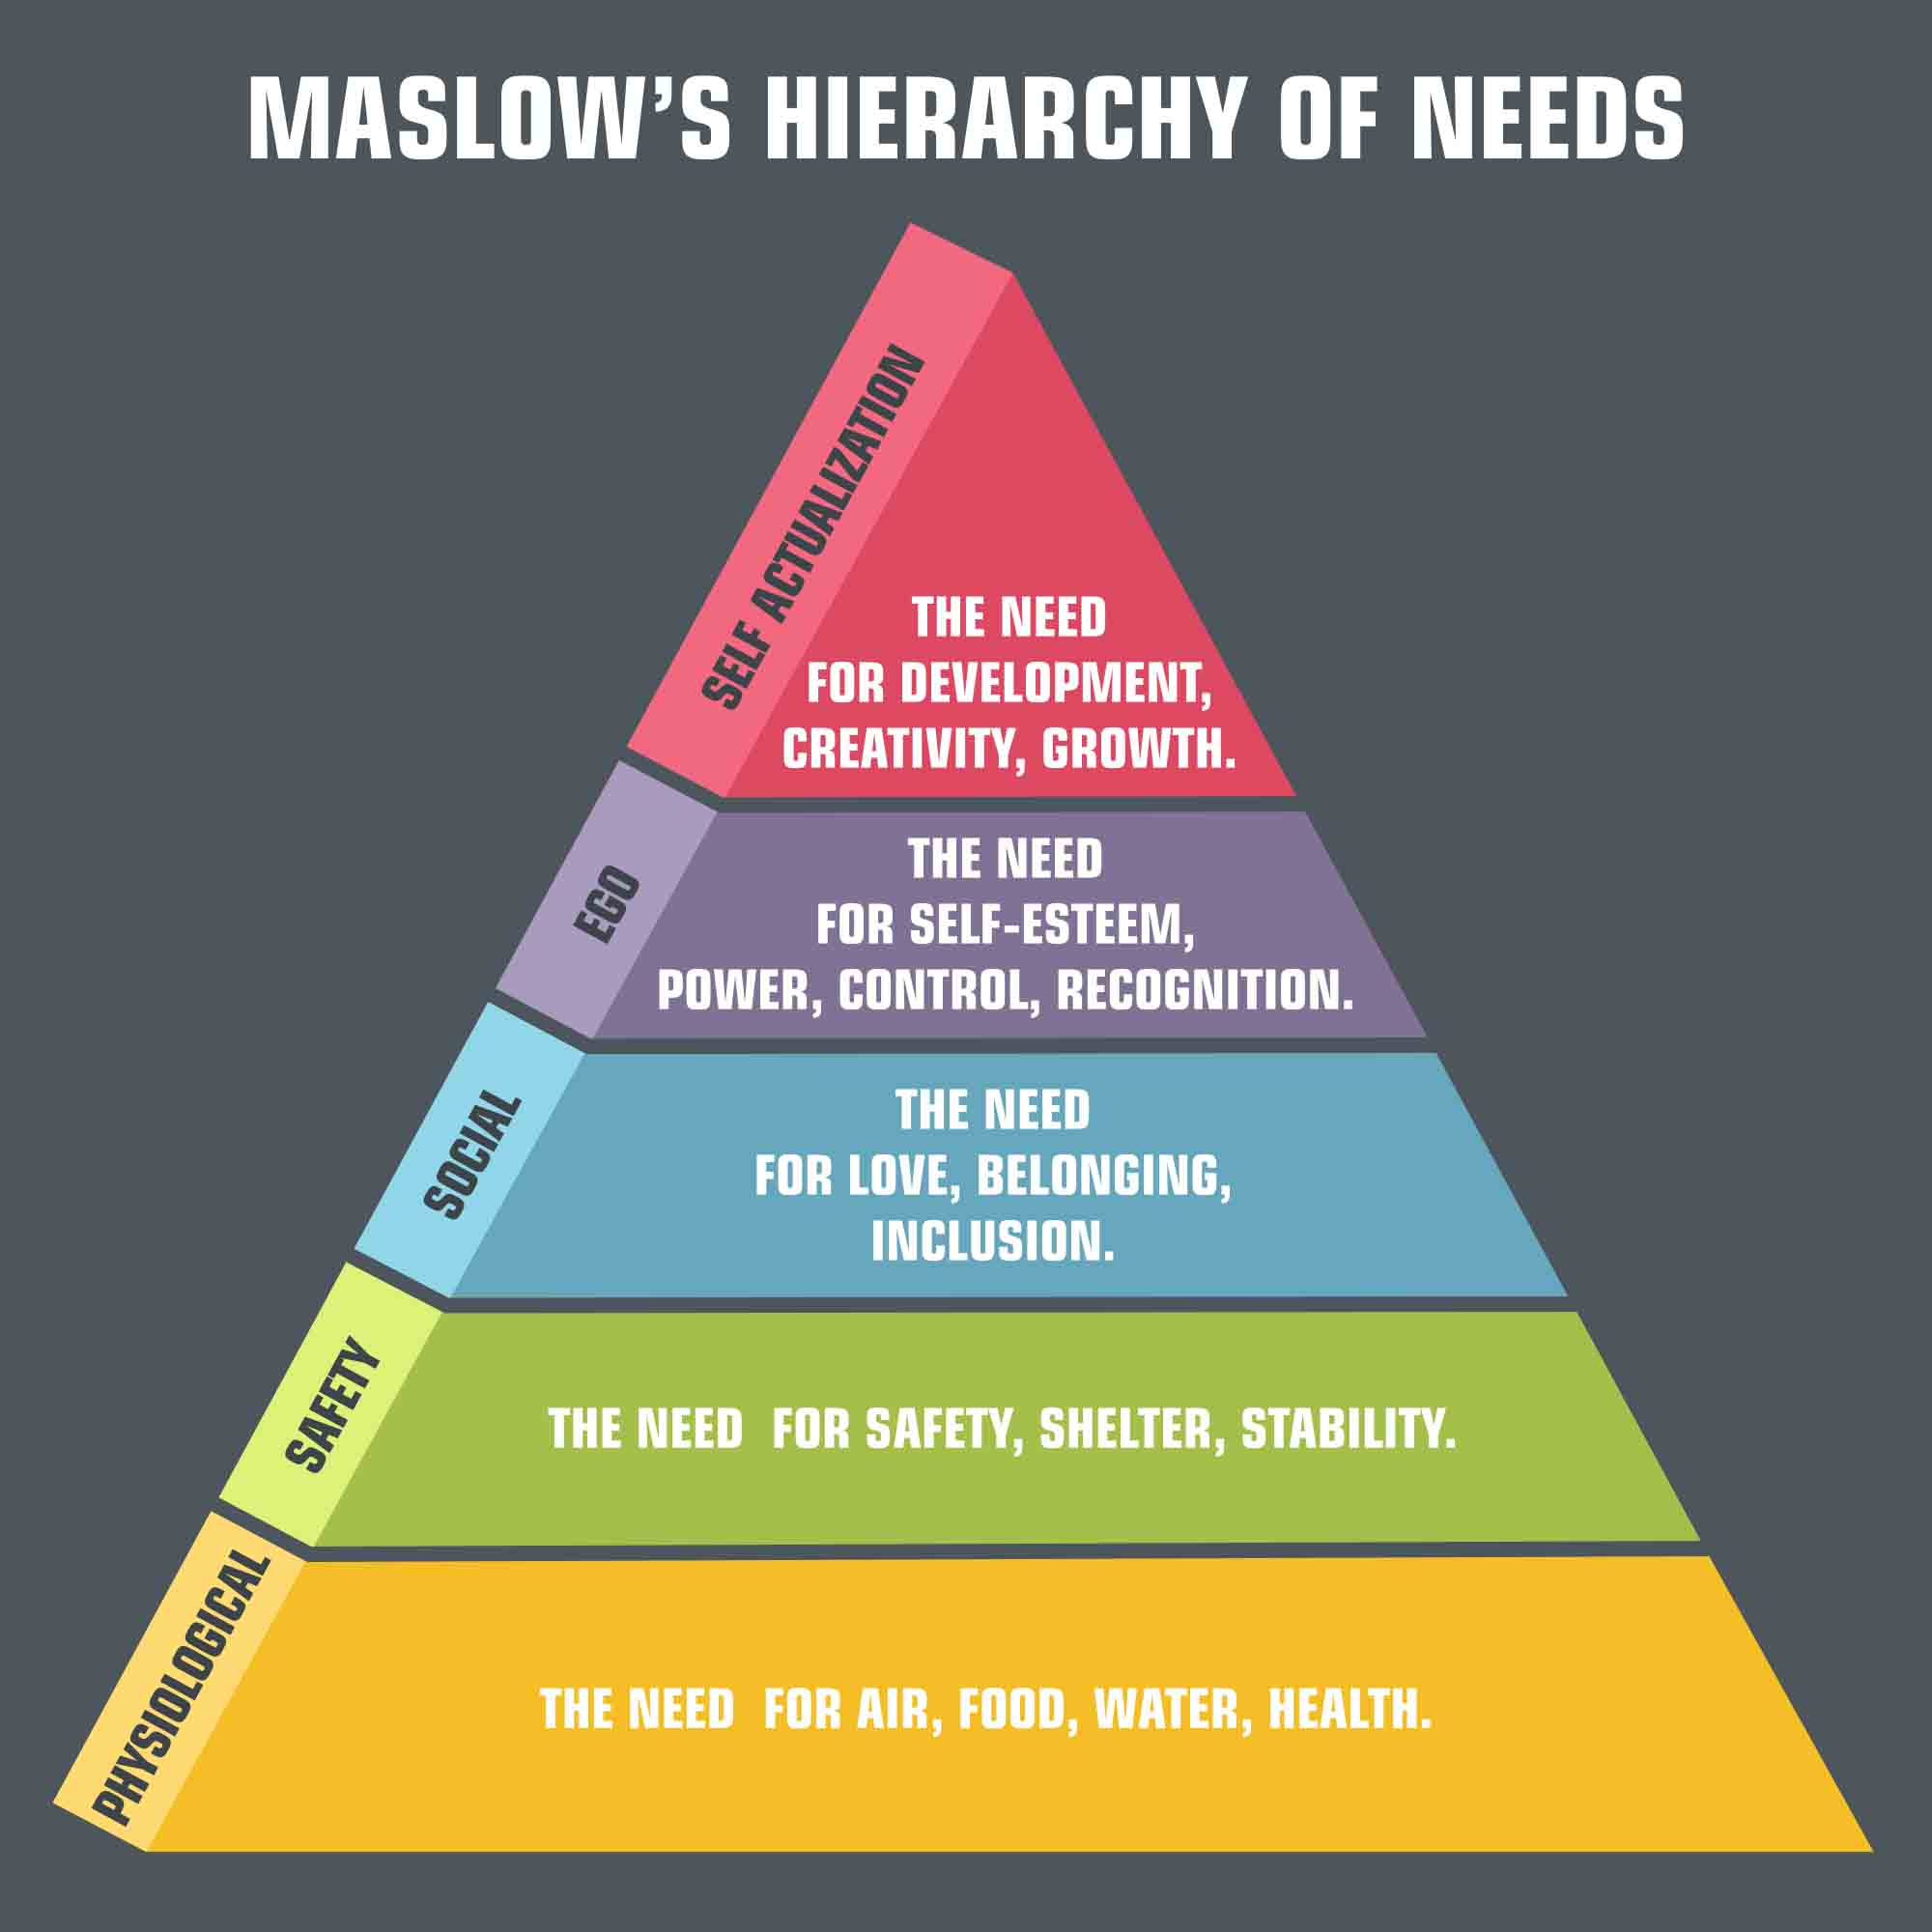 Maslow's Hierarchy of Needs and how it applies